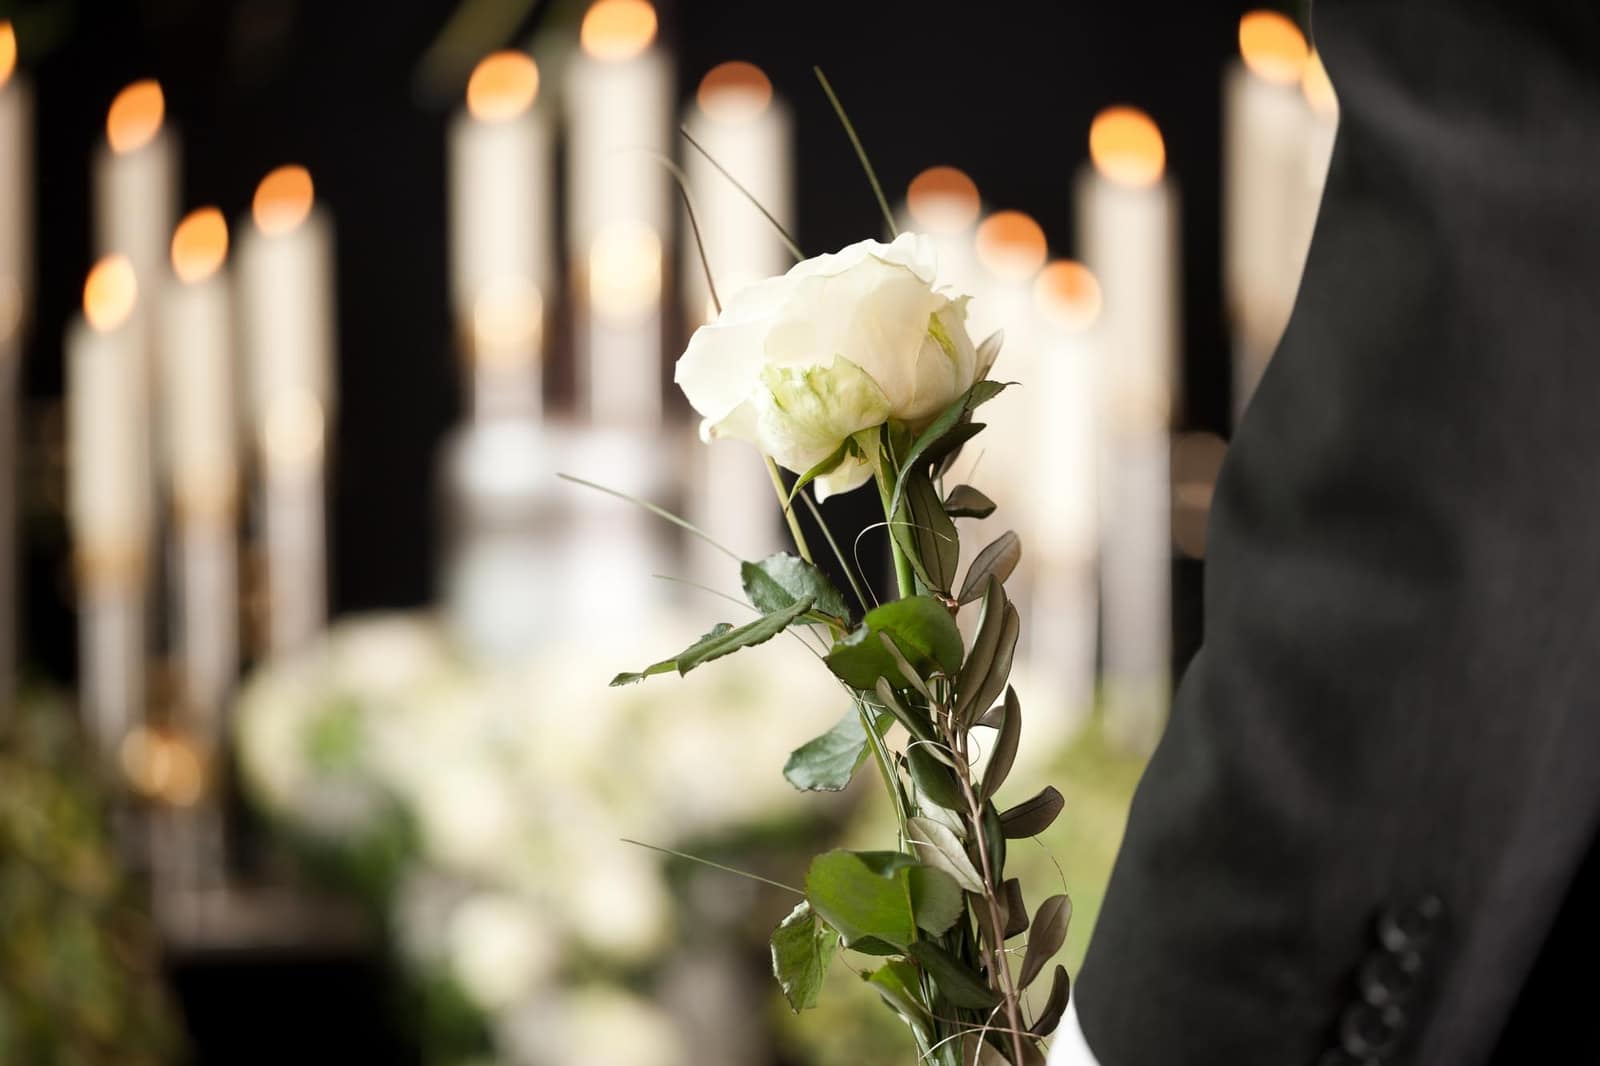 Man Holding Flower with candles blurred in the background